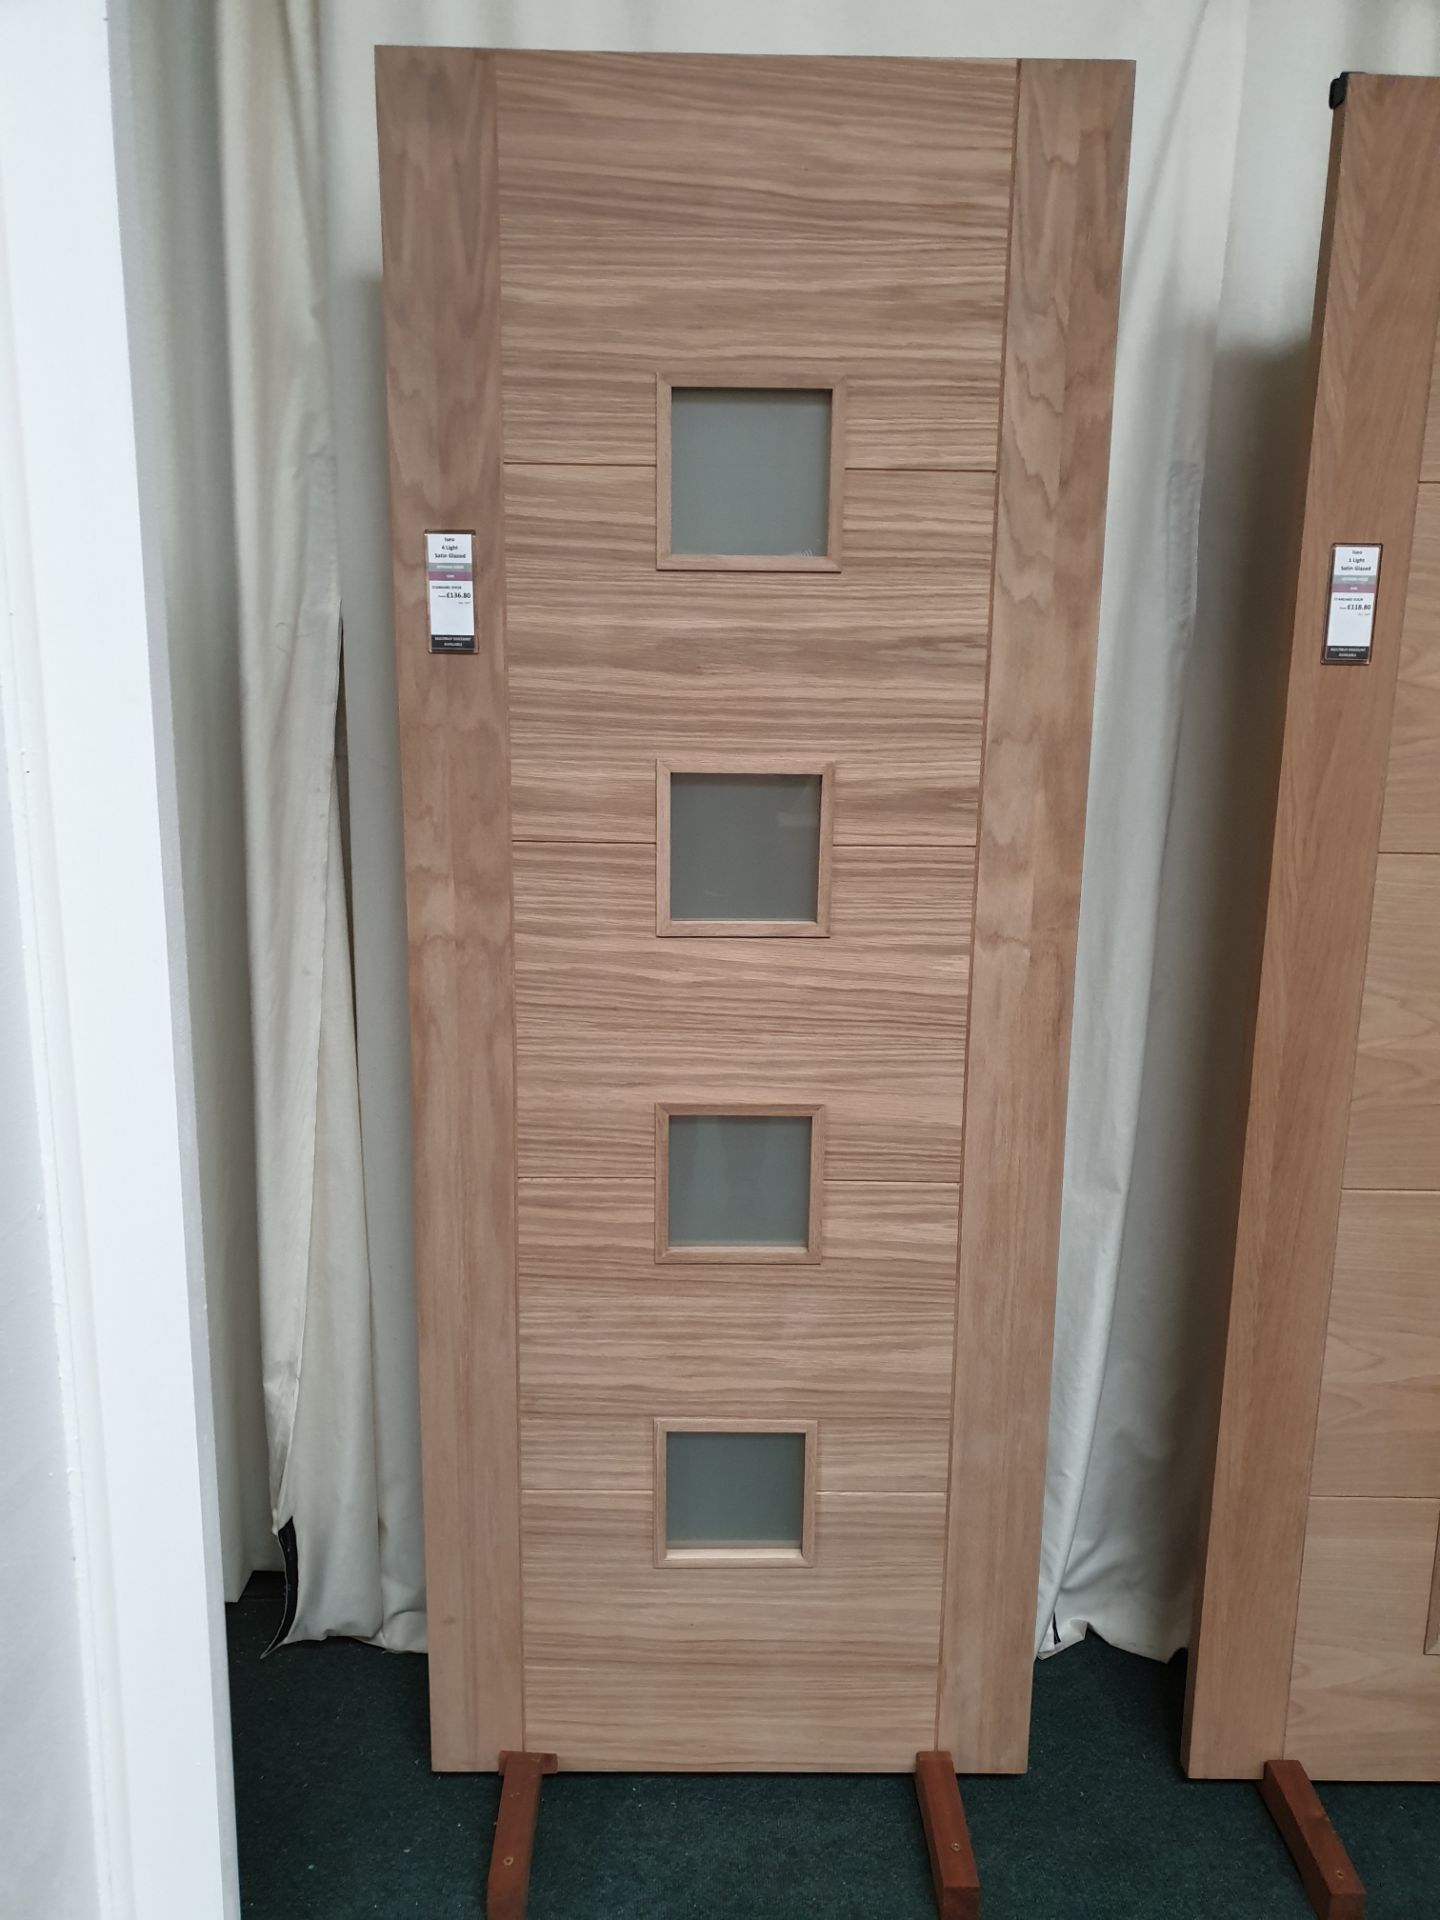 4 x Iseo 4510 Internal 4 Lite 5 Panel Centre Satin Glazed, 1981mm x 762mm x 35mm - Lots to be handed